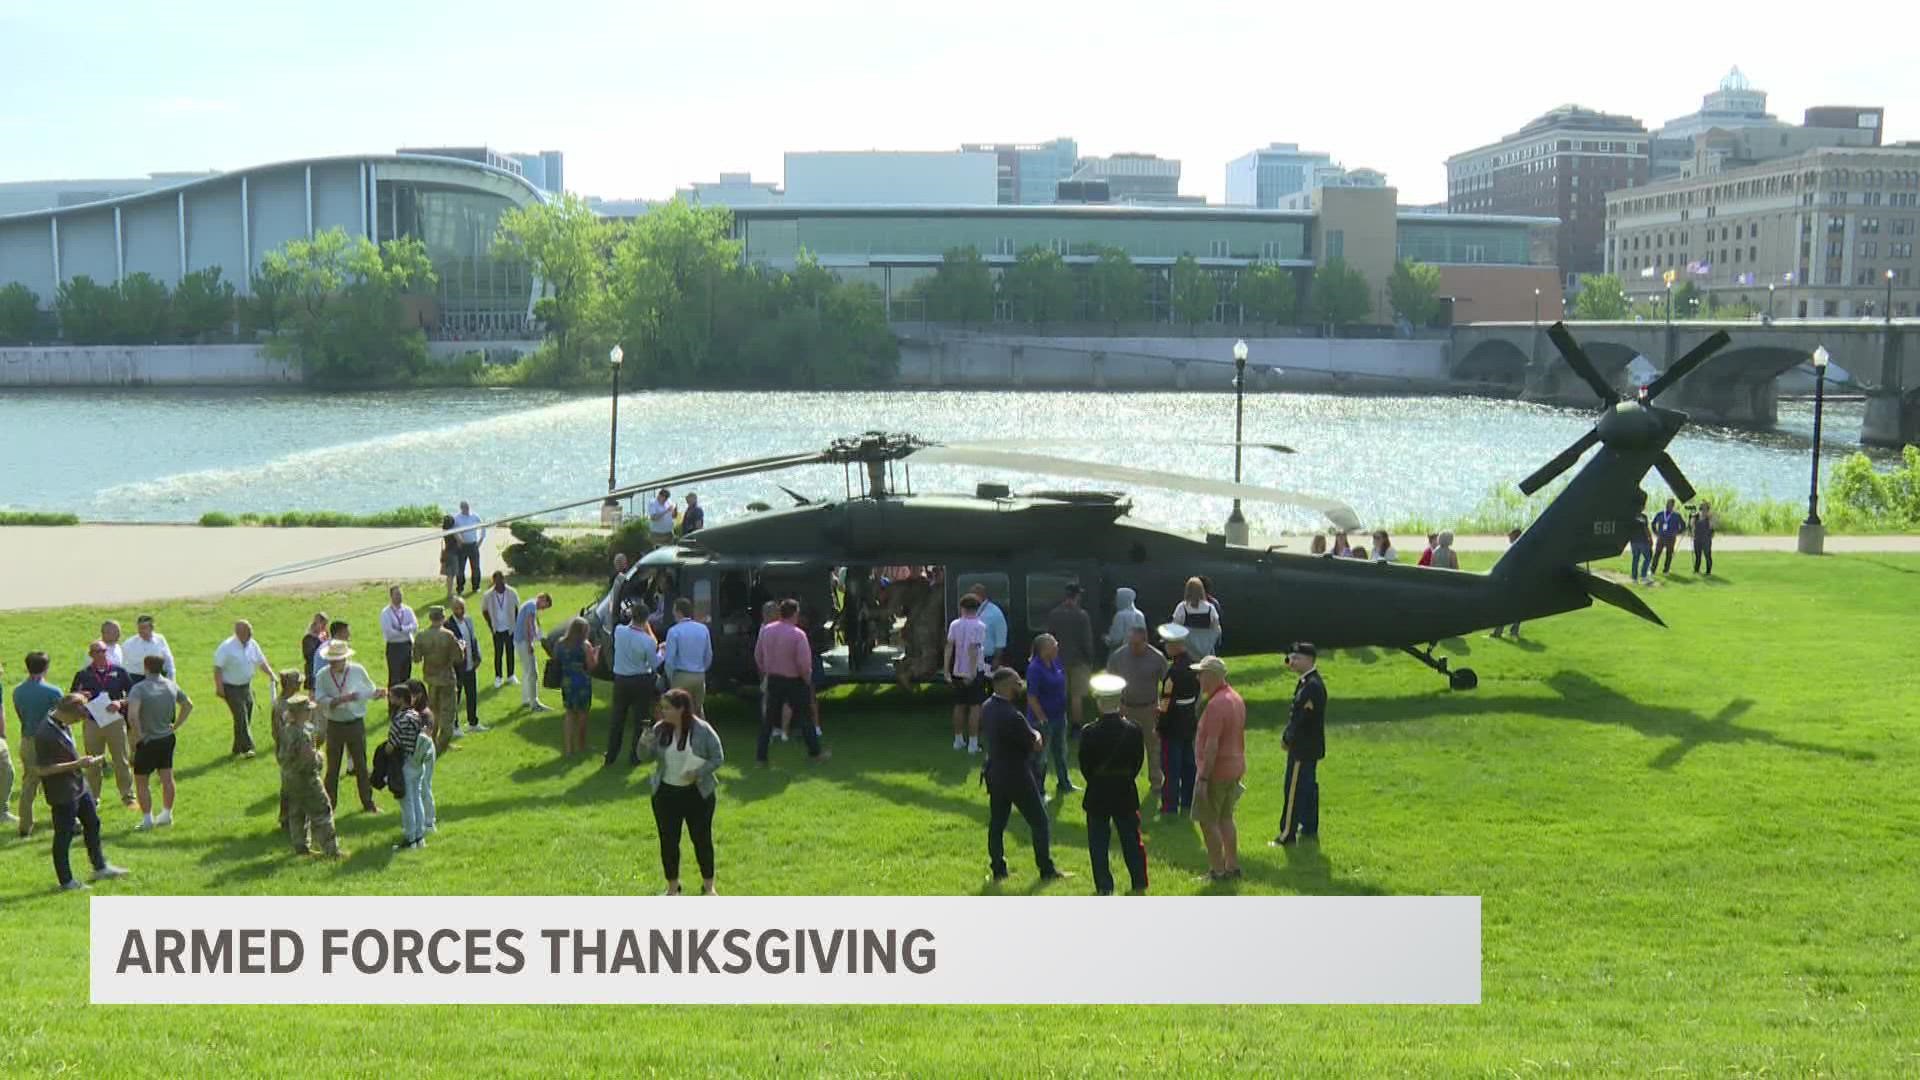 Friday marked the 7th annual Armed Forces Thanksgiving at the JW Marriott in Grand Rapids.